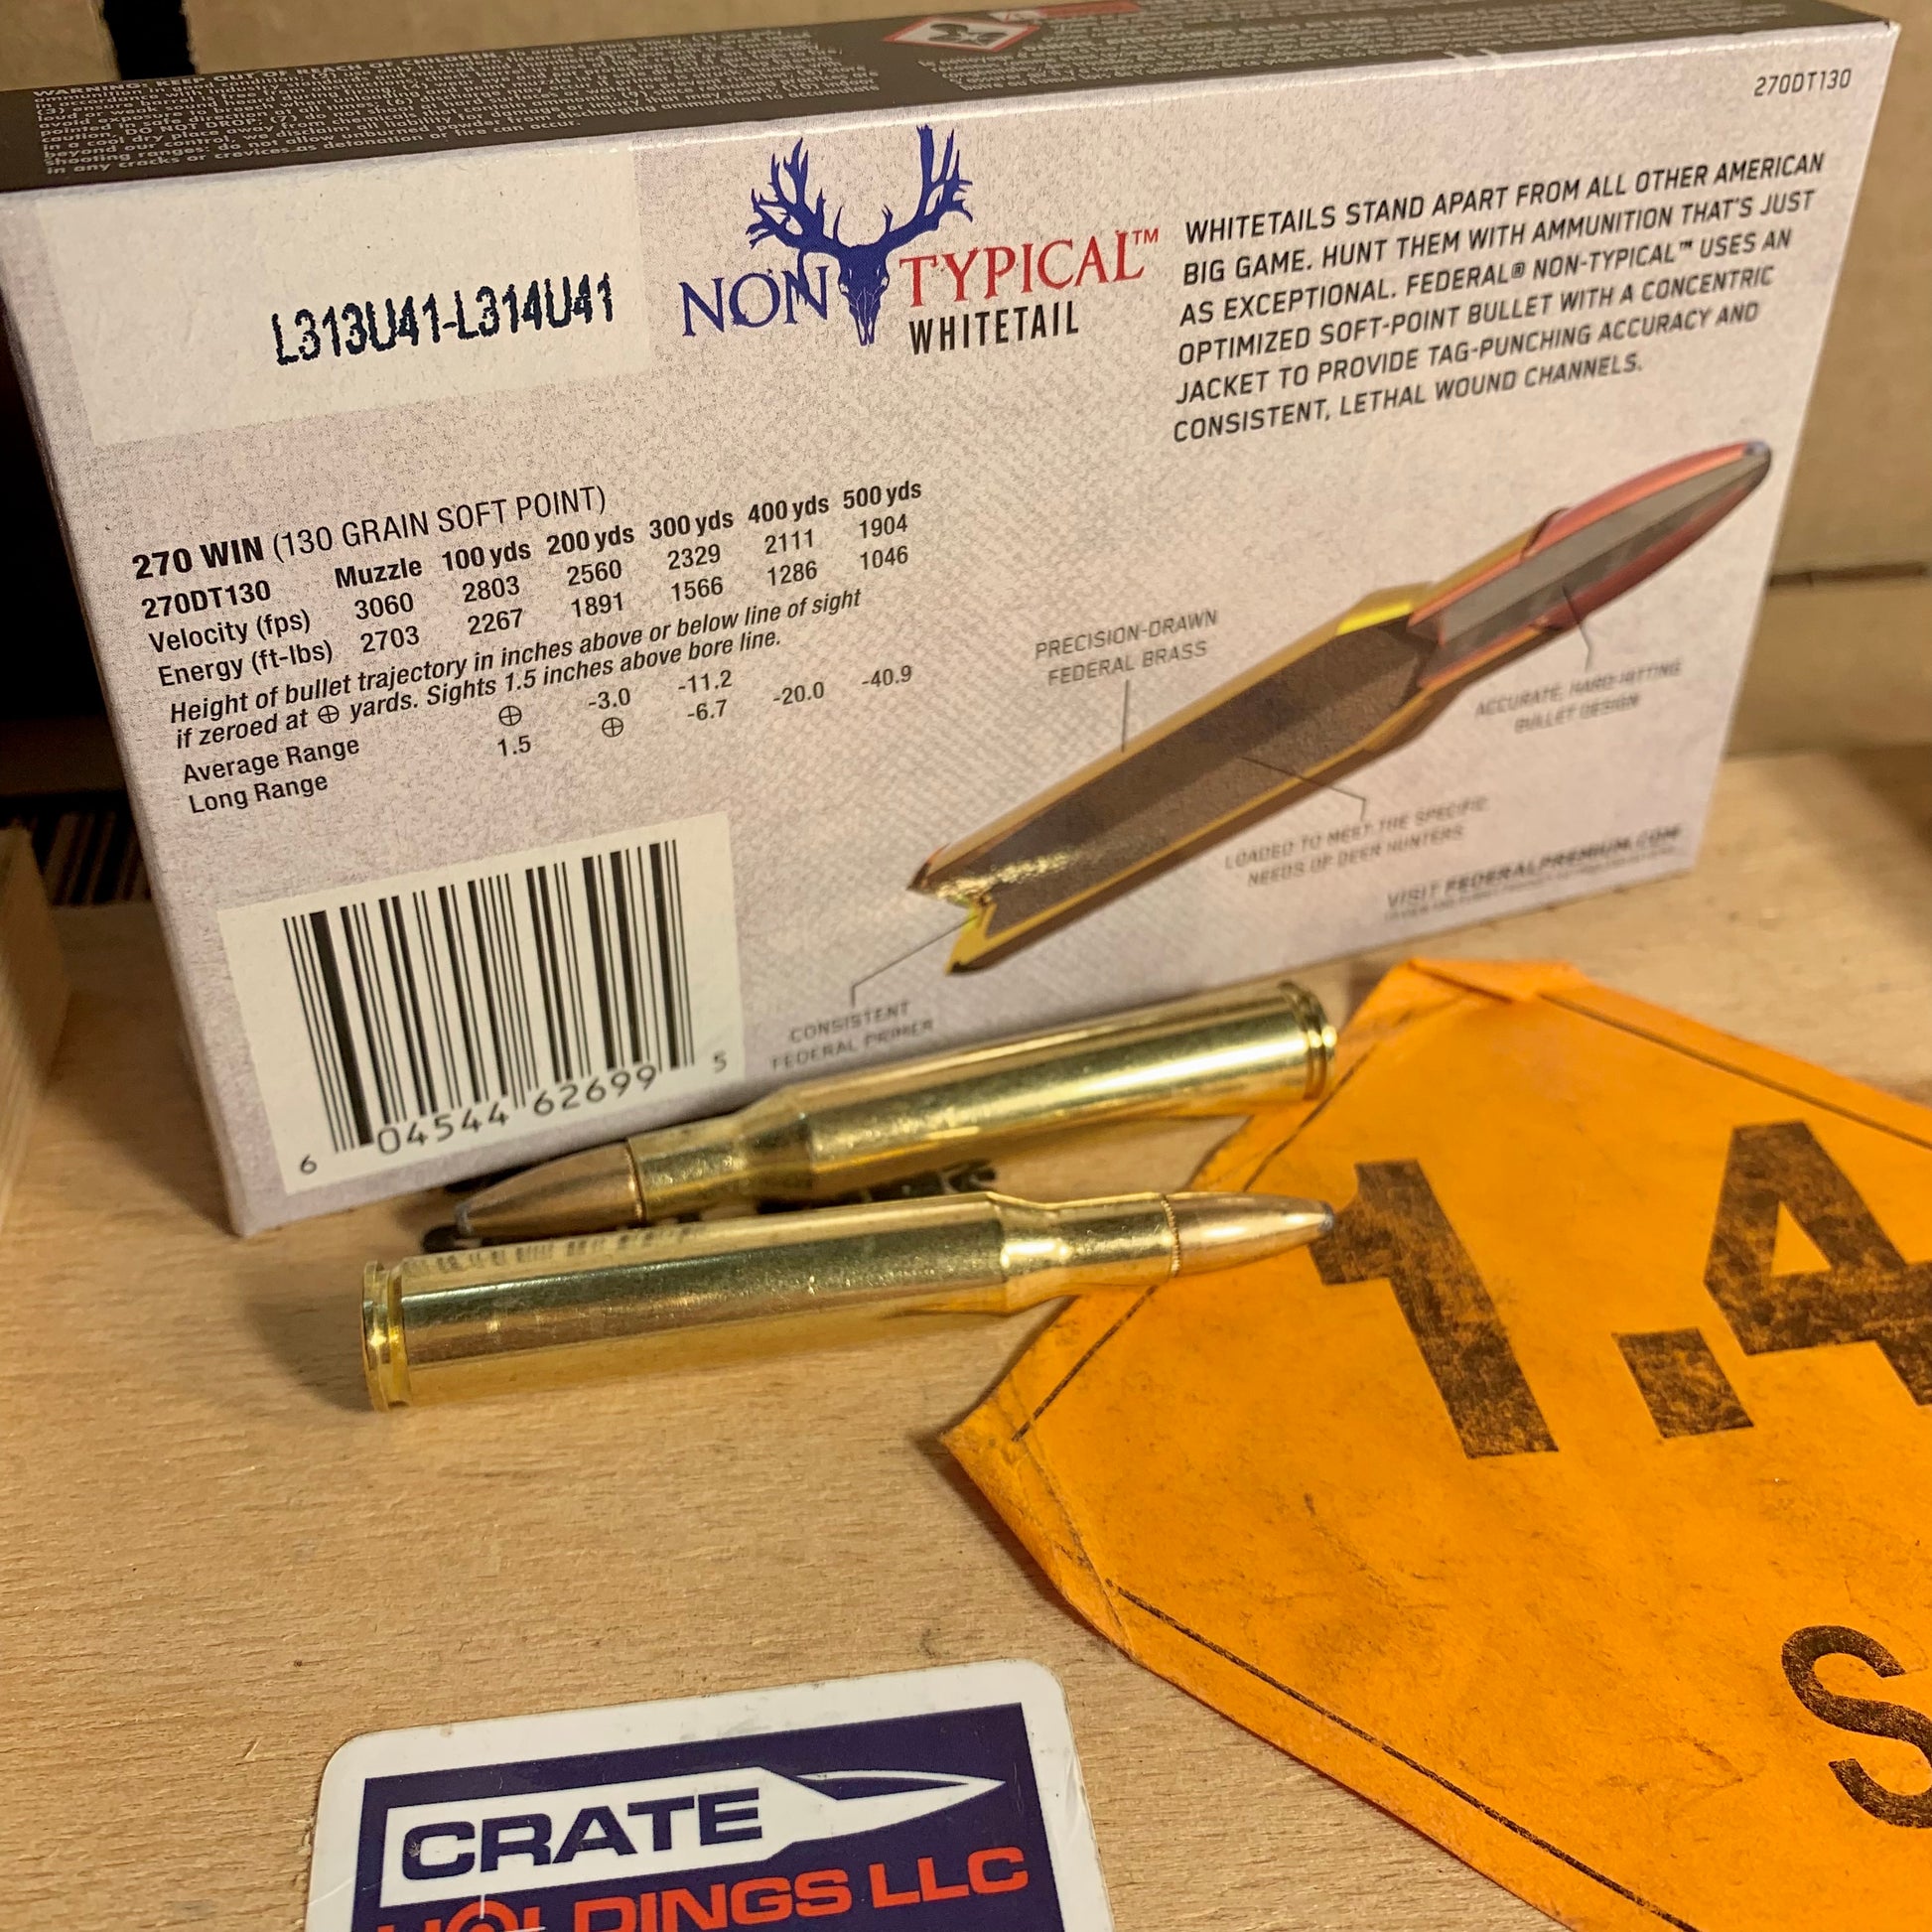 20 Round Box Federal Non-Typical Whitetail .270 Winchester Ammo 130gr Soft Point - 270DT130